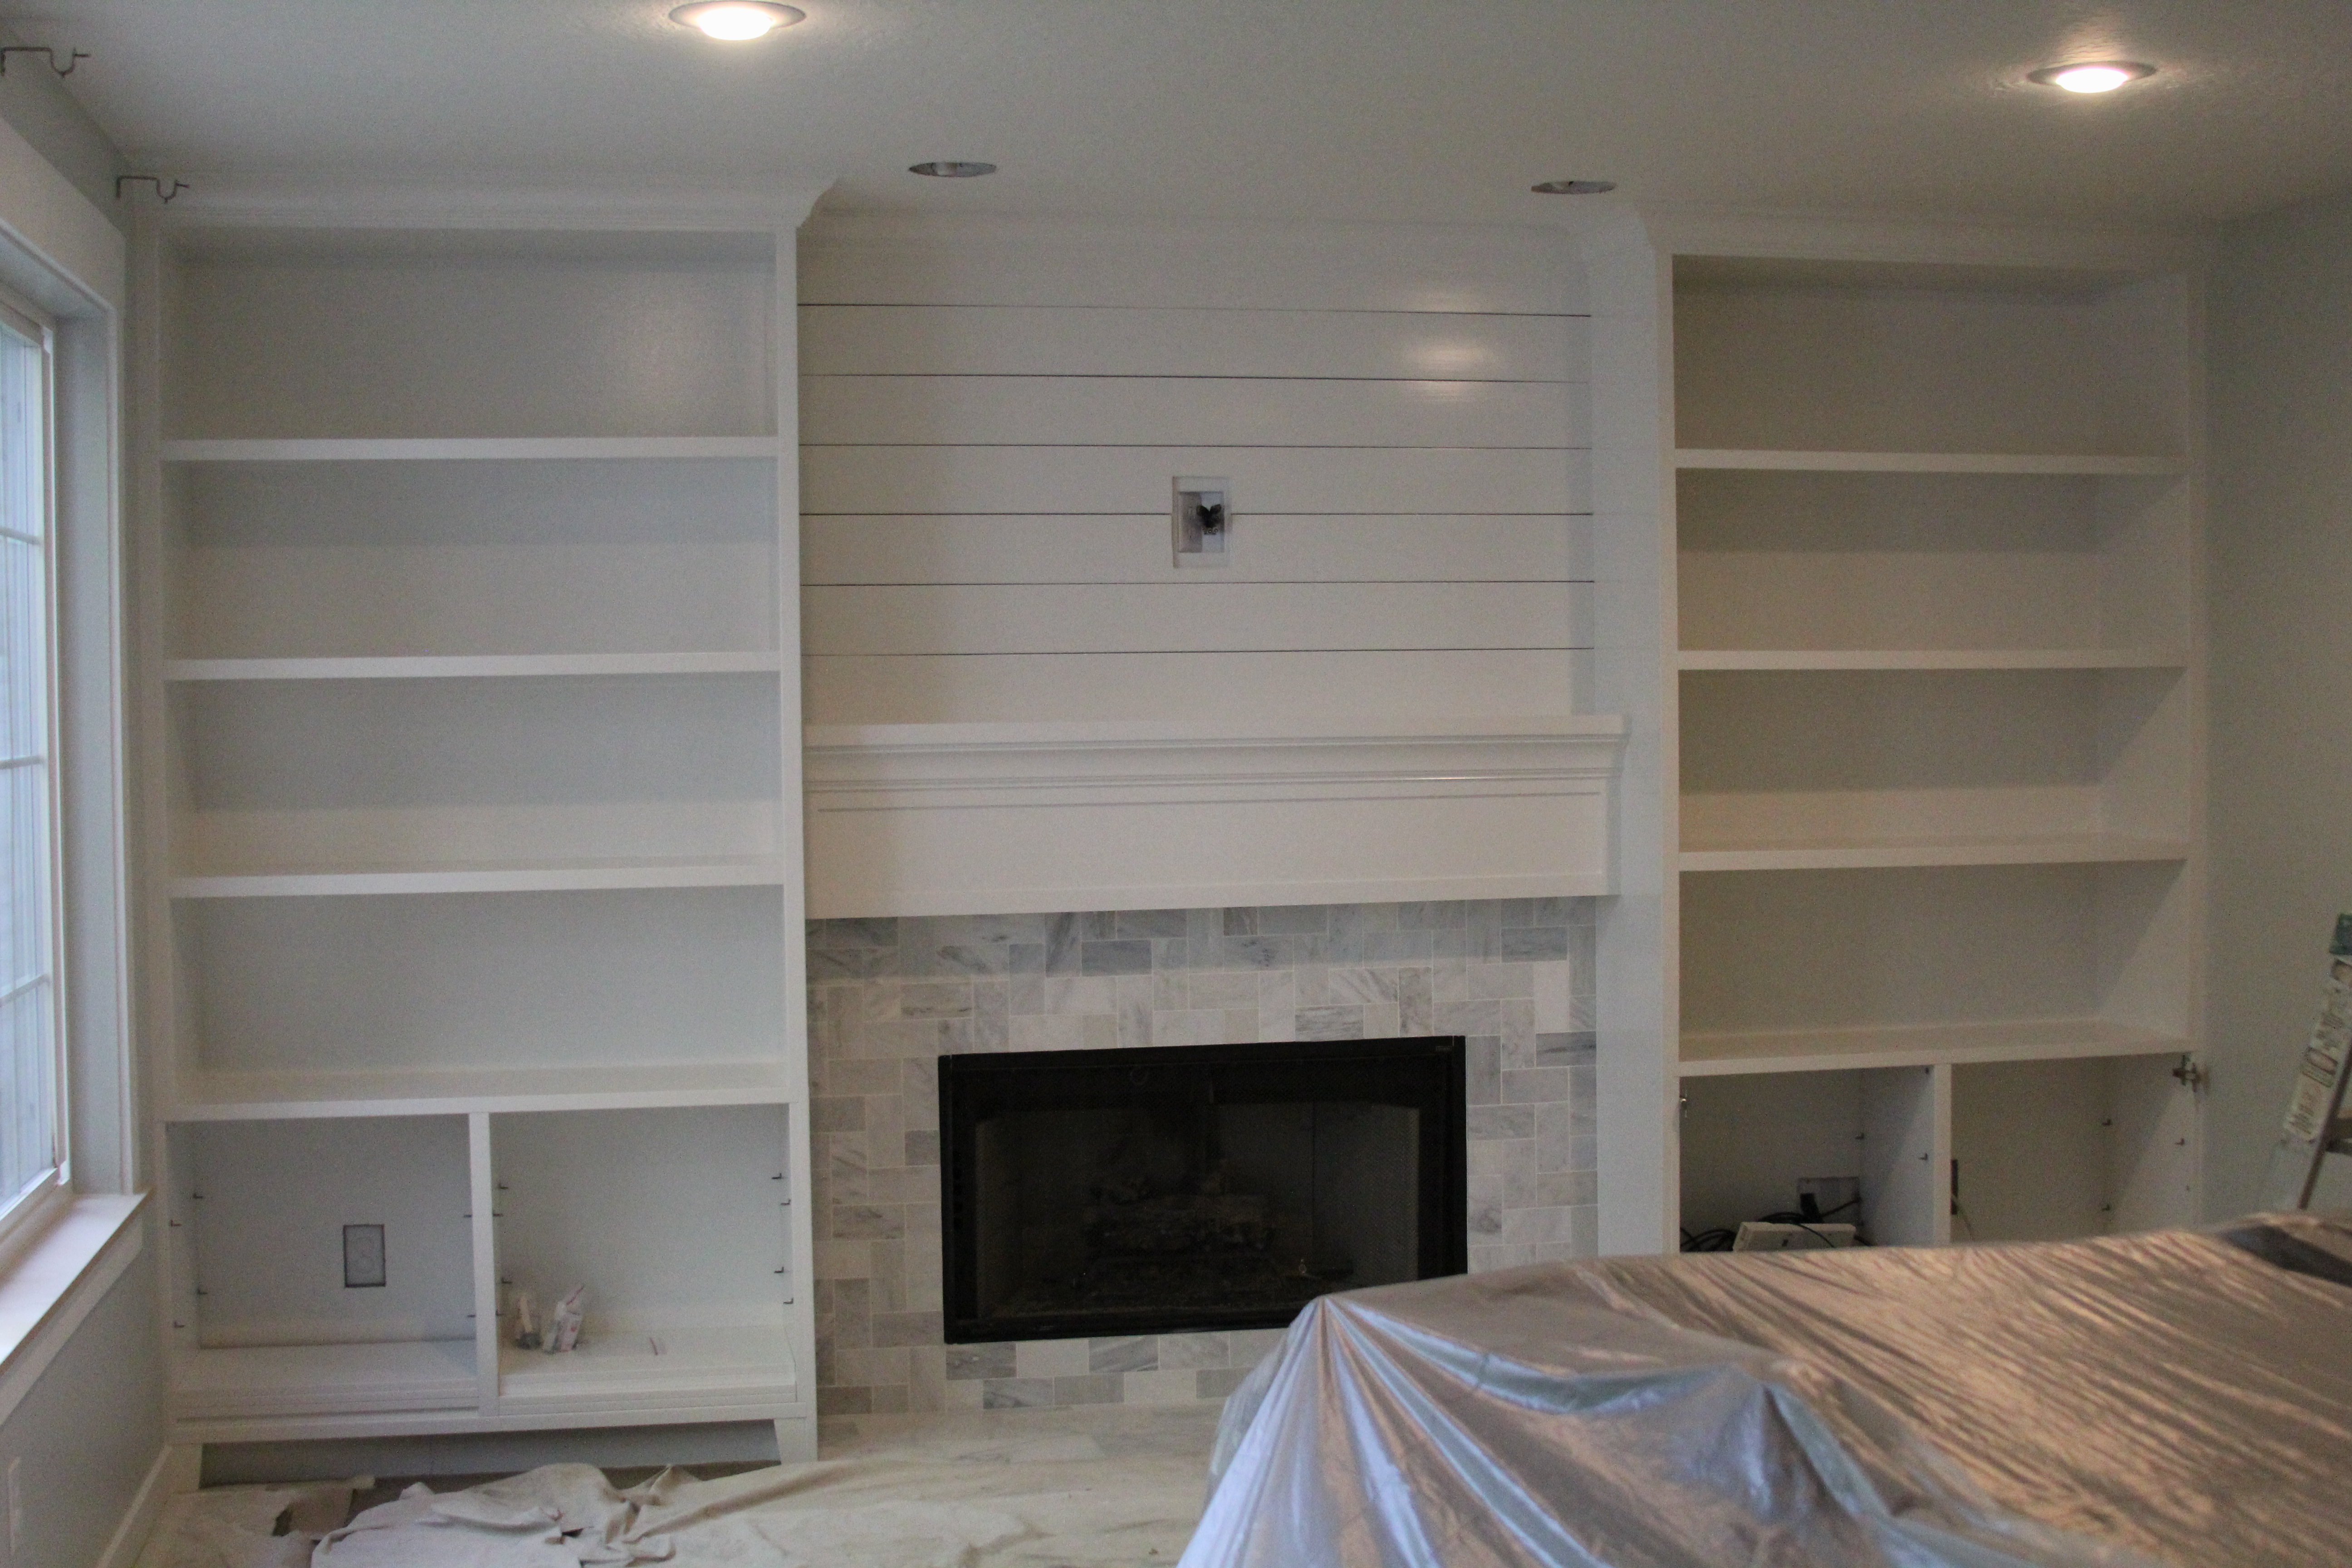 Diy Built Ins Part 2 Stagg Design, Built In Bookshelves Around Fireplace Cost